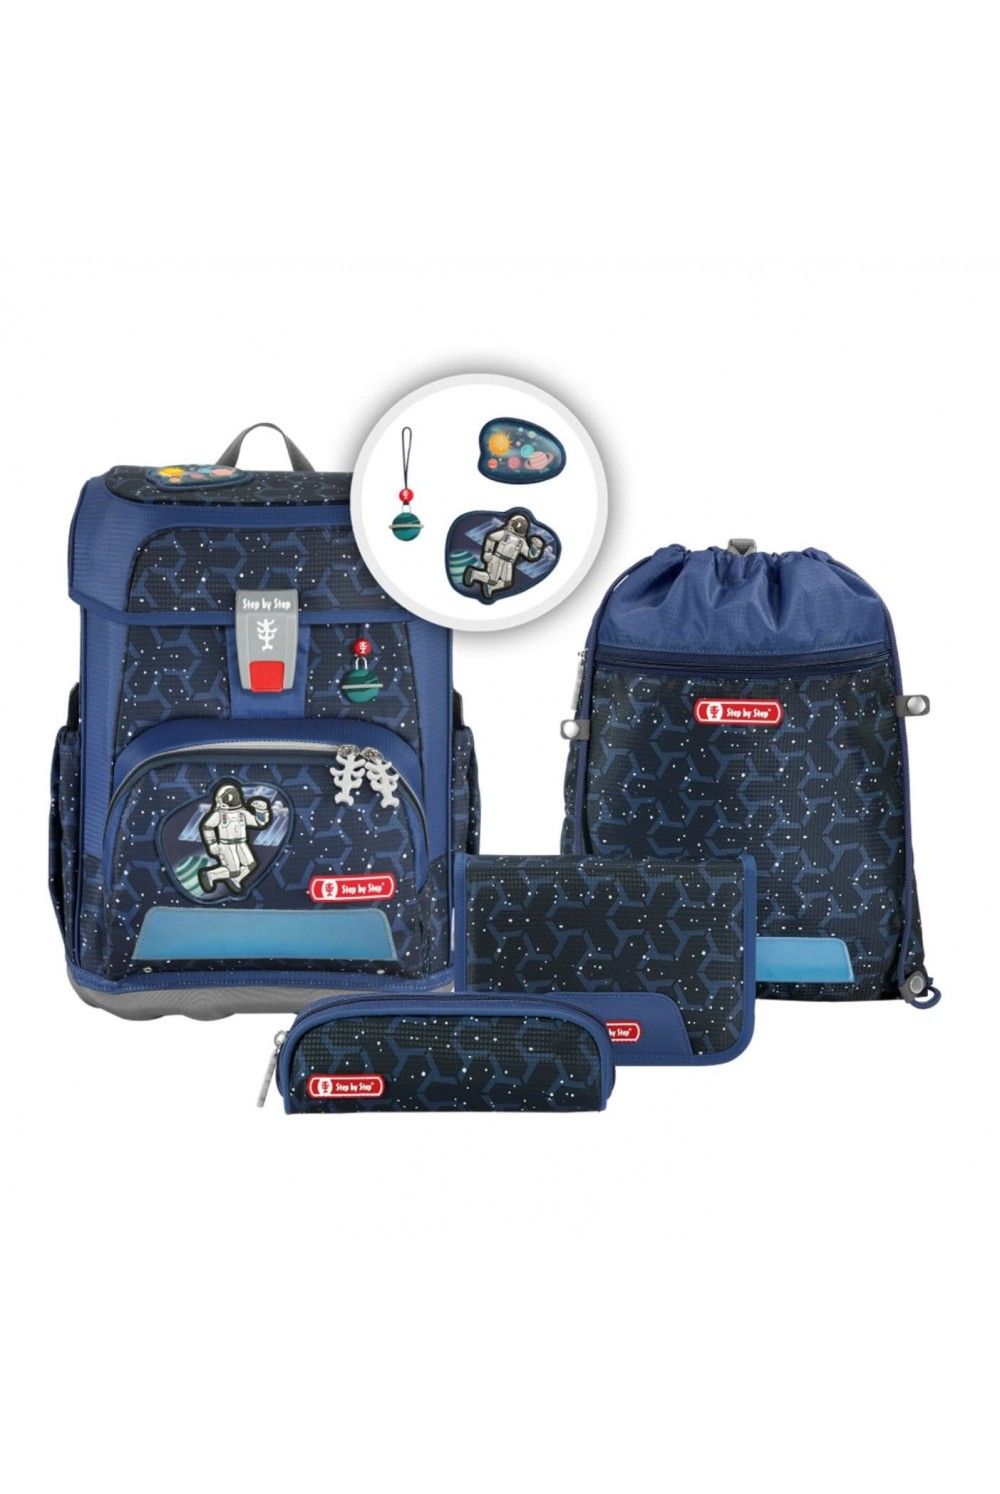 School backpack set Step by Step Cloud 5 pieces Star Astronaut